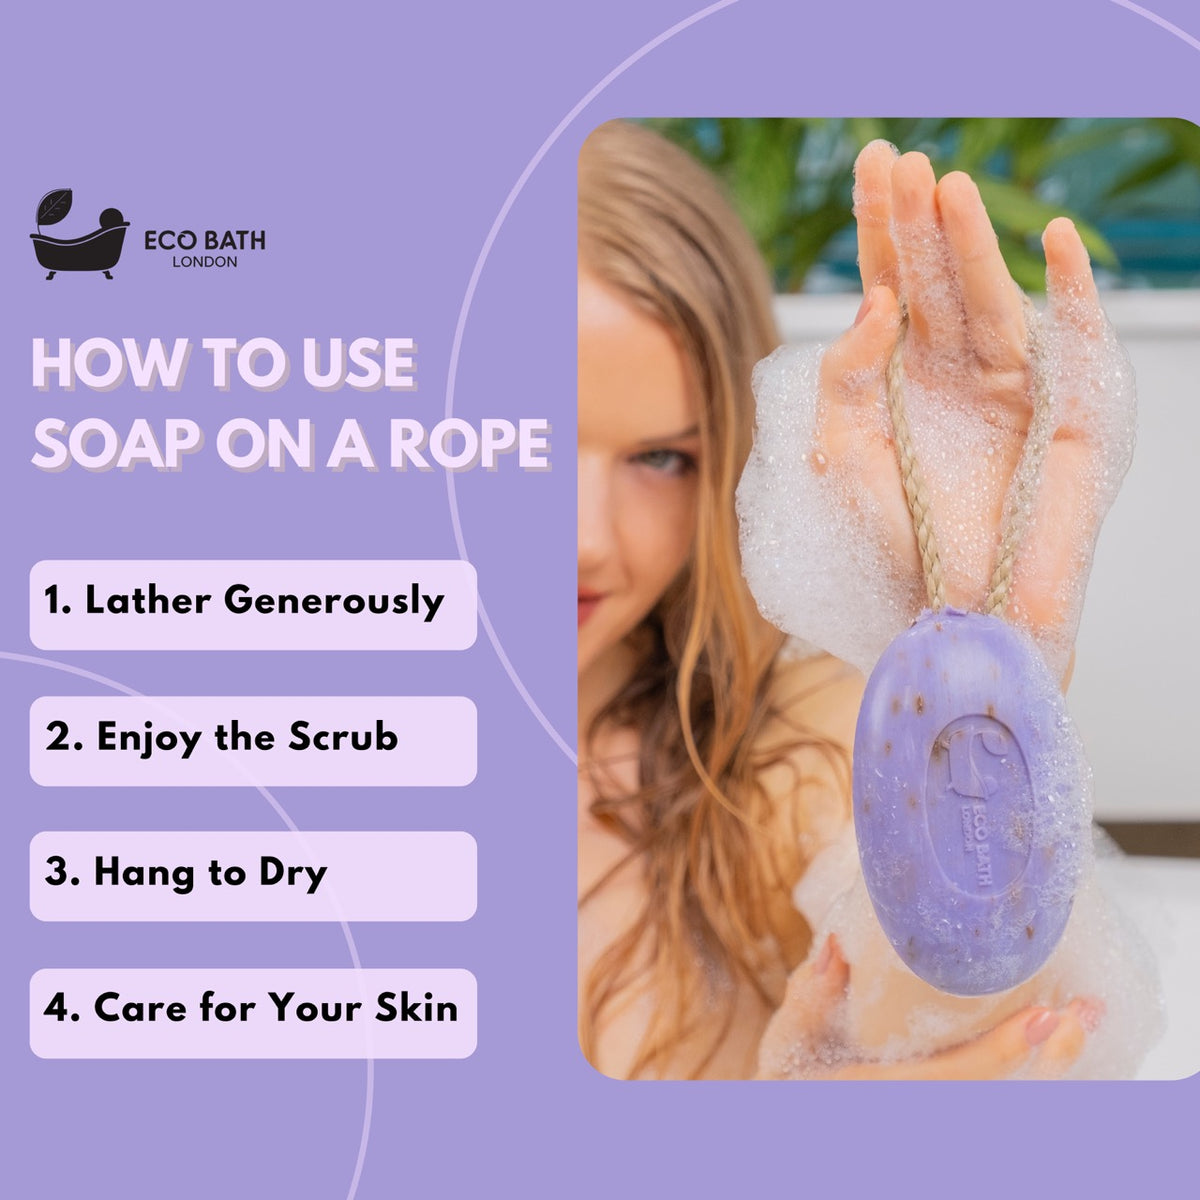 Eco Bath Lavender Soap on a Rope - 220g